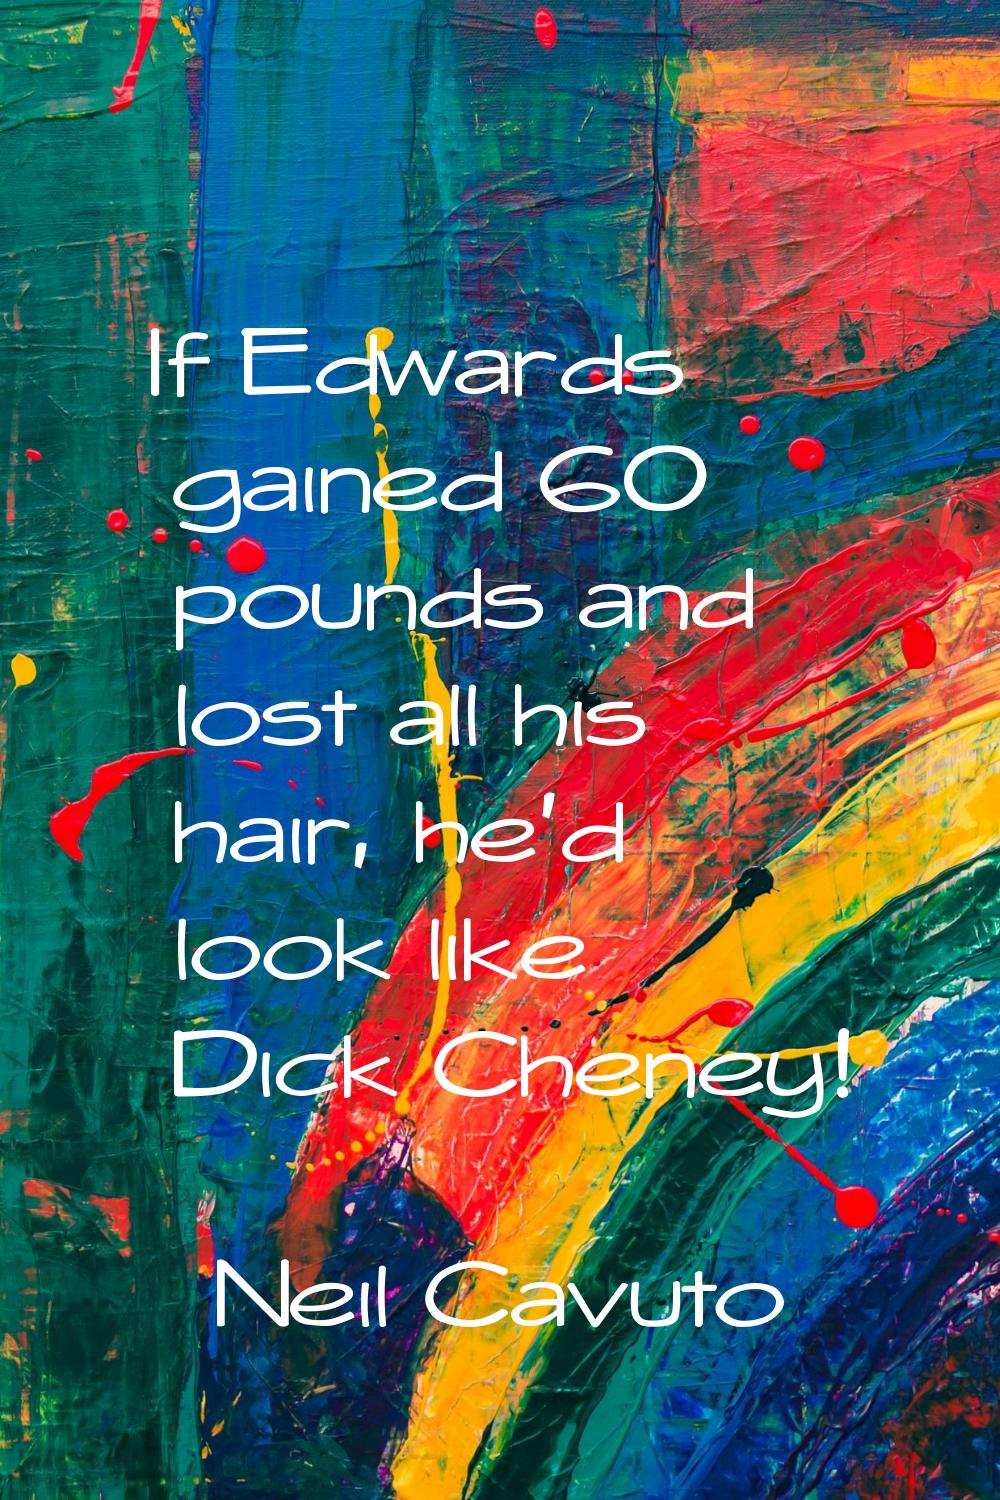 If Edwards gained 60 pounds and lost all his hair, he'd look like Dick Cheney!